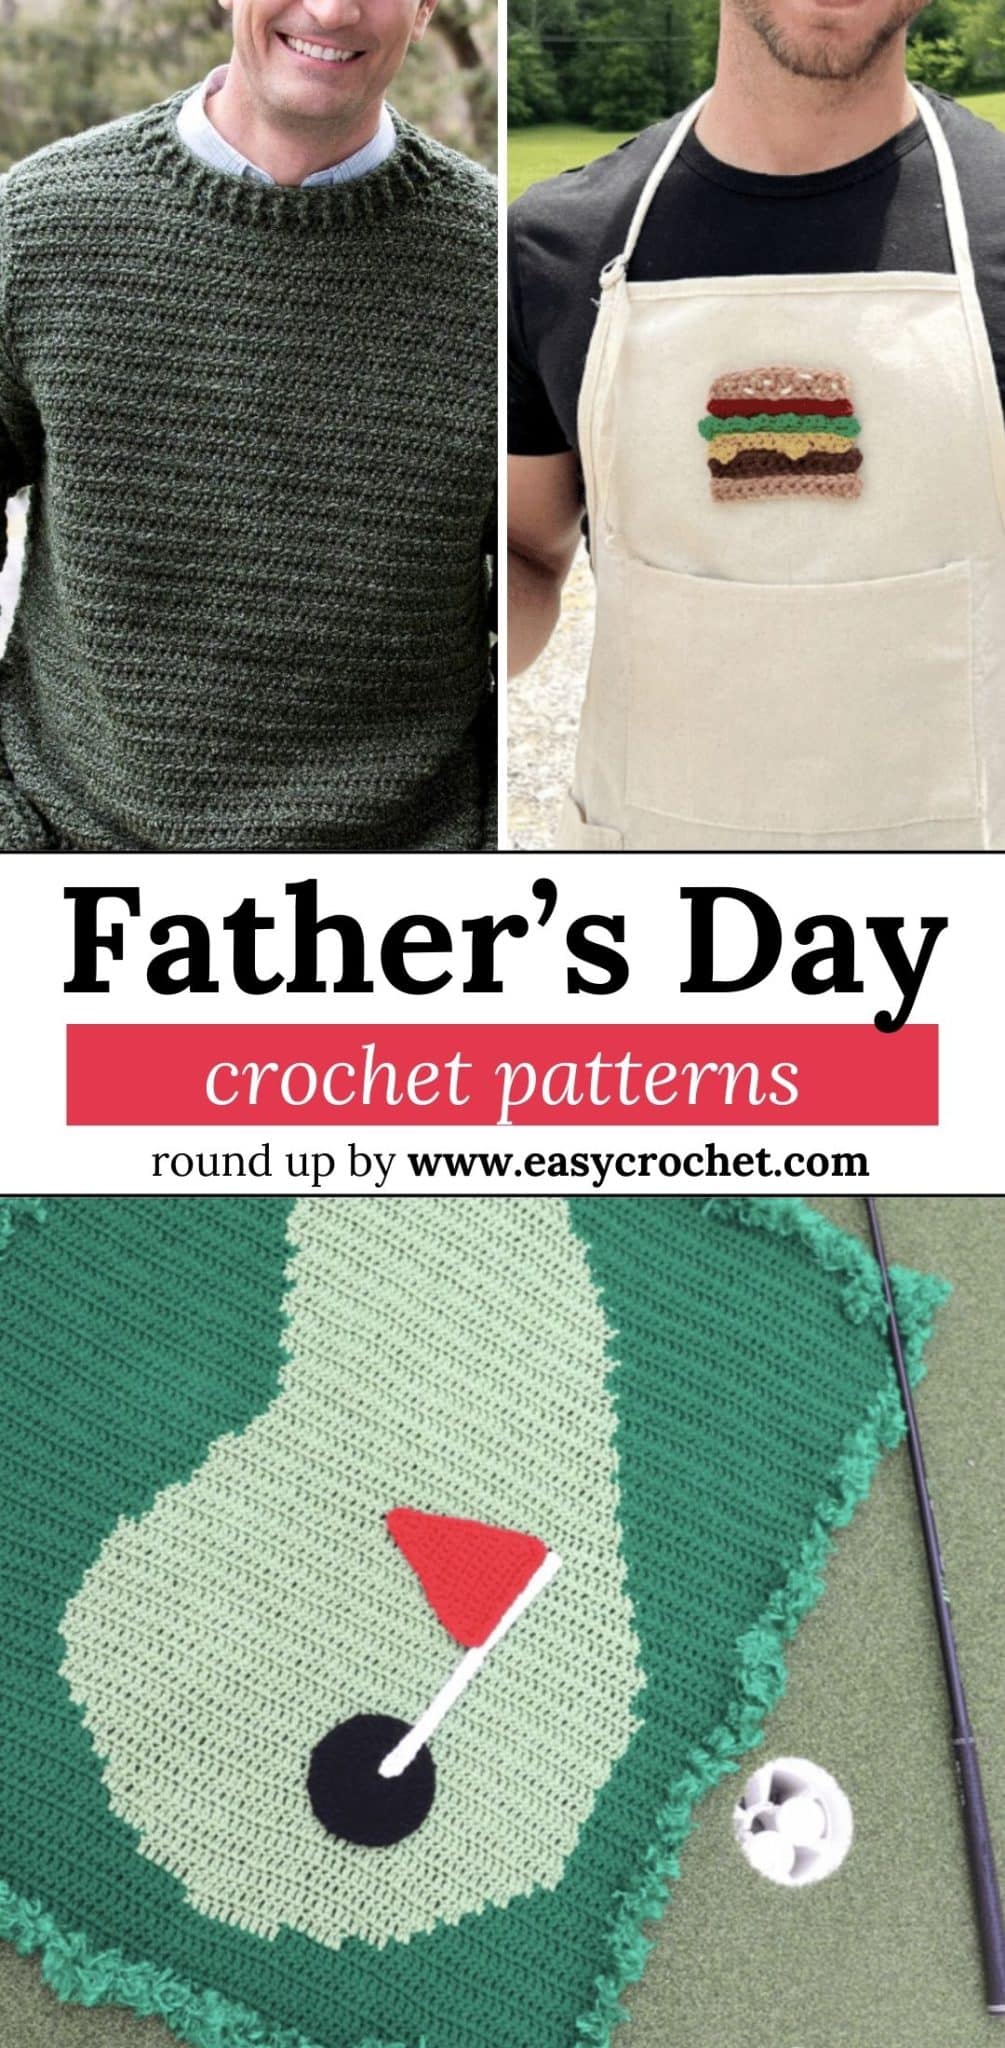 father's day crochet patterns 